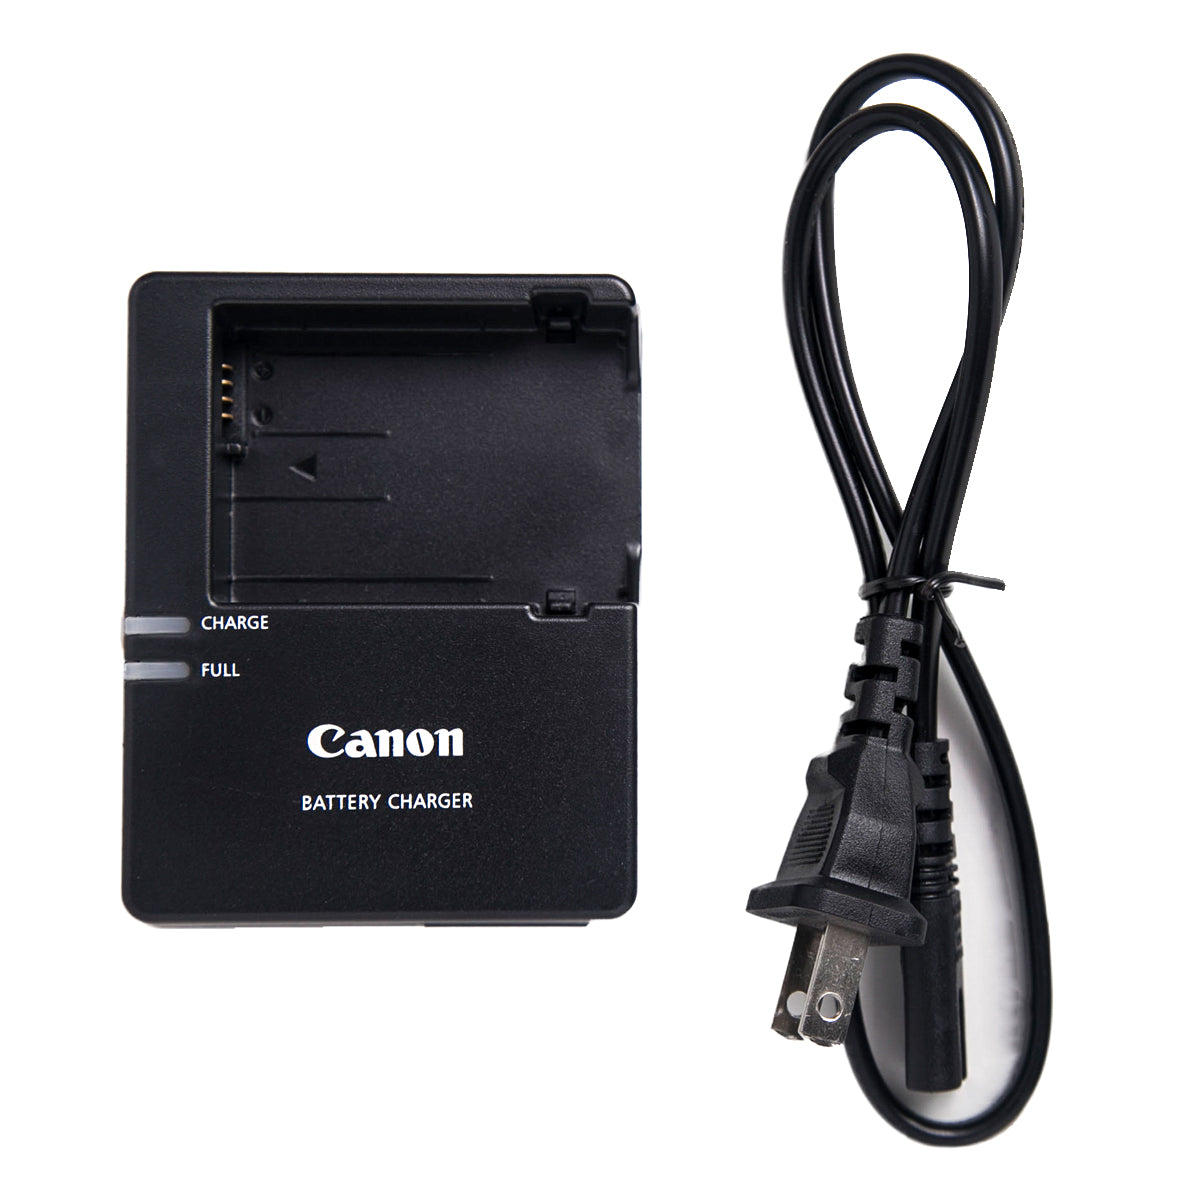 Pxel Canon LC-E8 Replacement Battery Charger for Canon LP-E8 Lithium-Ion Batteries EOS 550D/600D/650D/700D Rebel T2i/T3i/T4i/T5i Cameras (Class A)